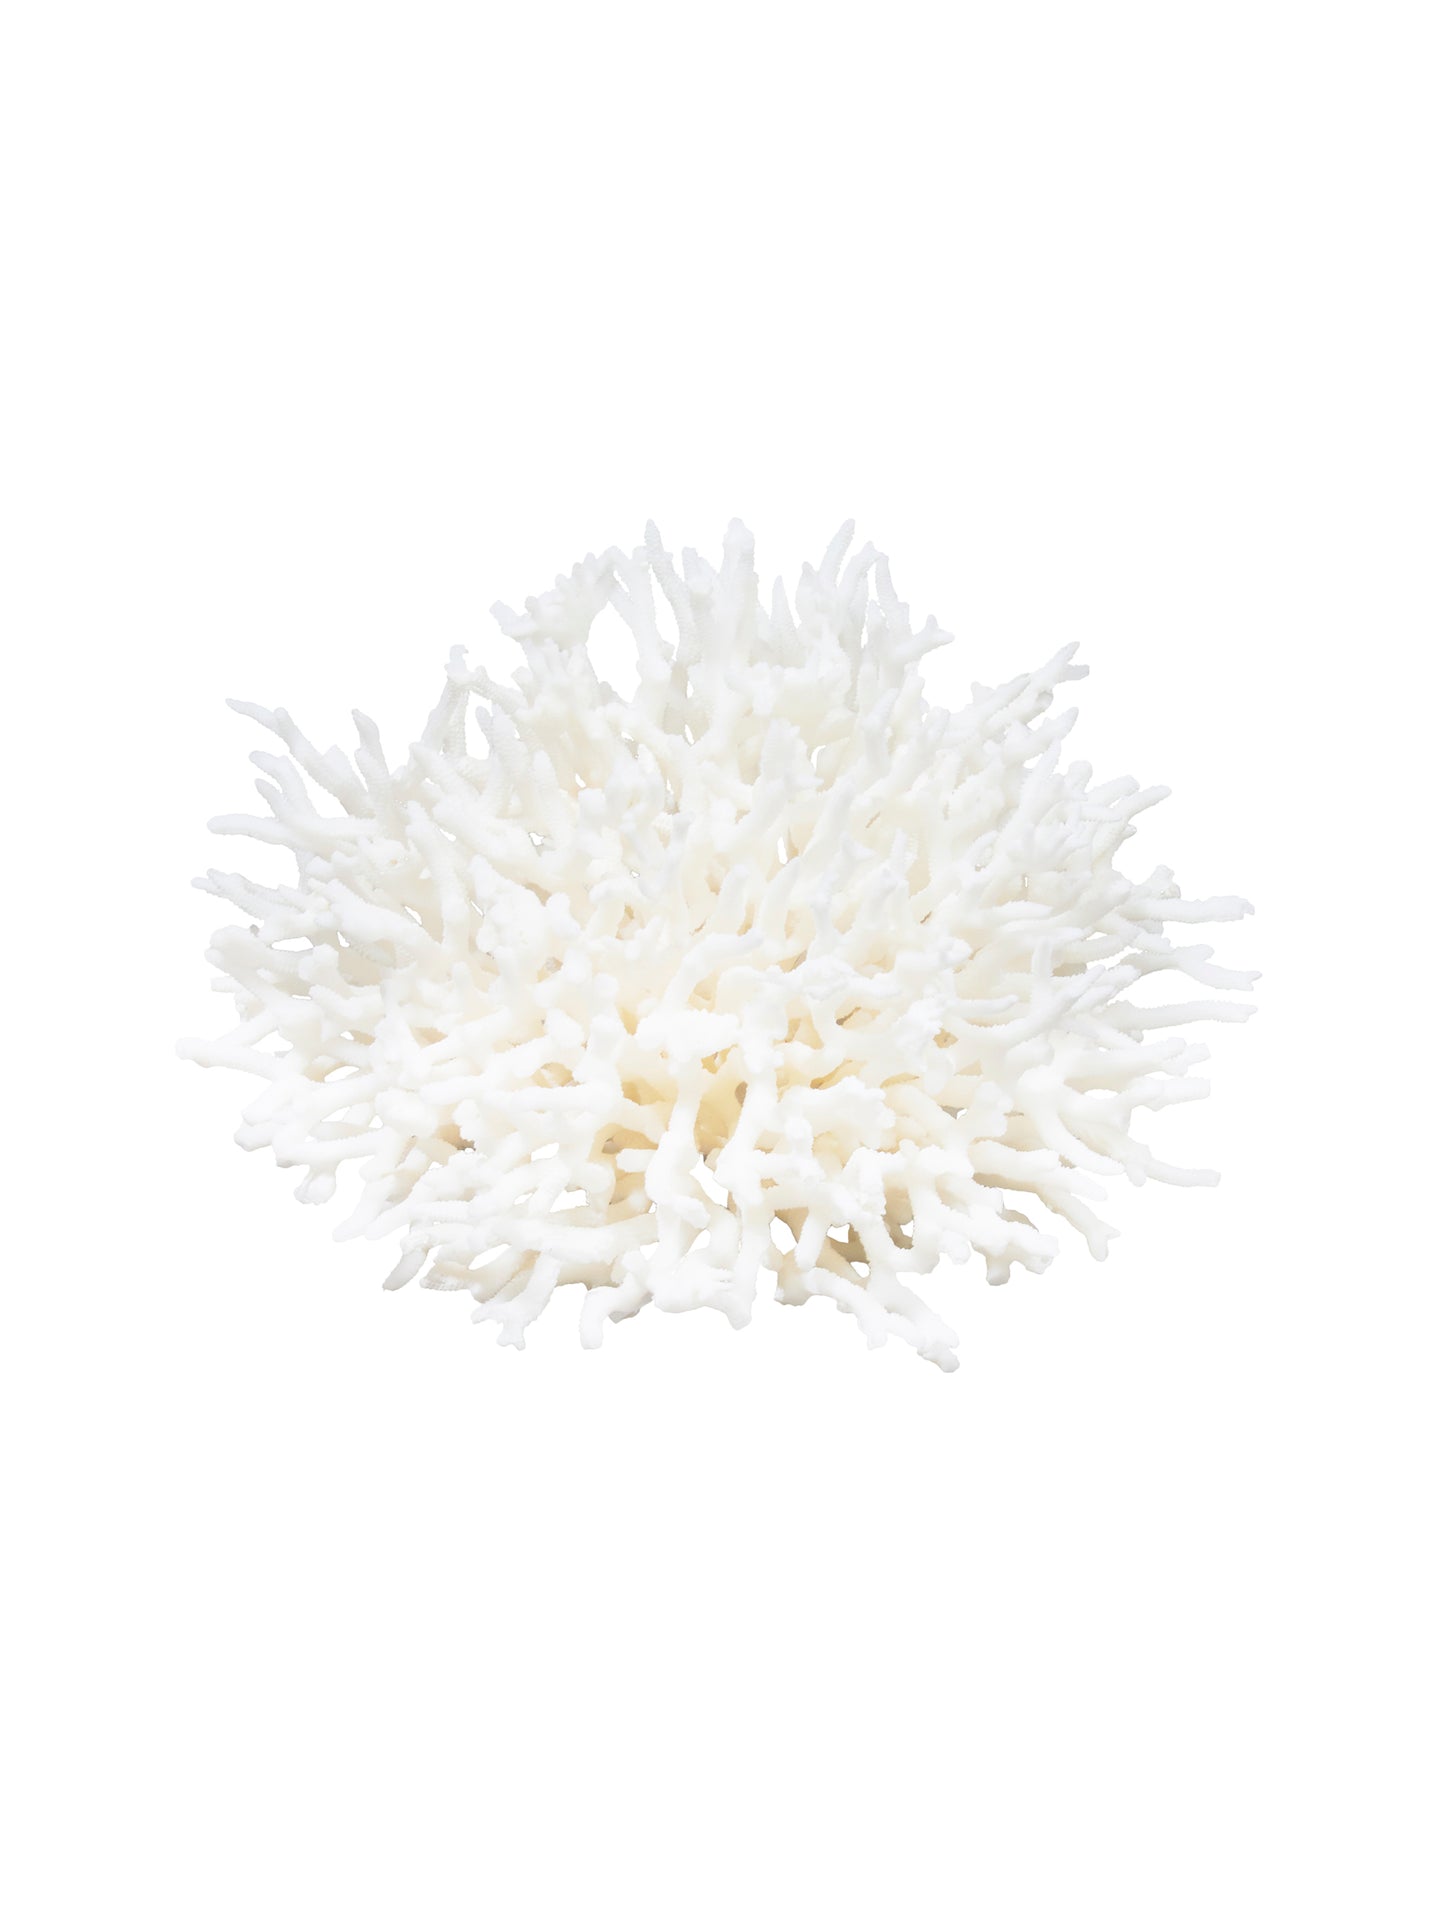 South Pacific Bird's Nest Coral Style Four Weston Table